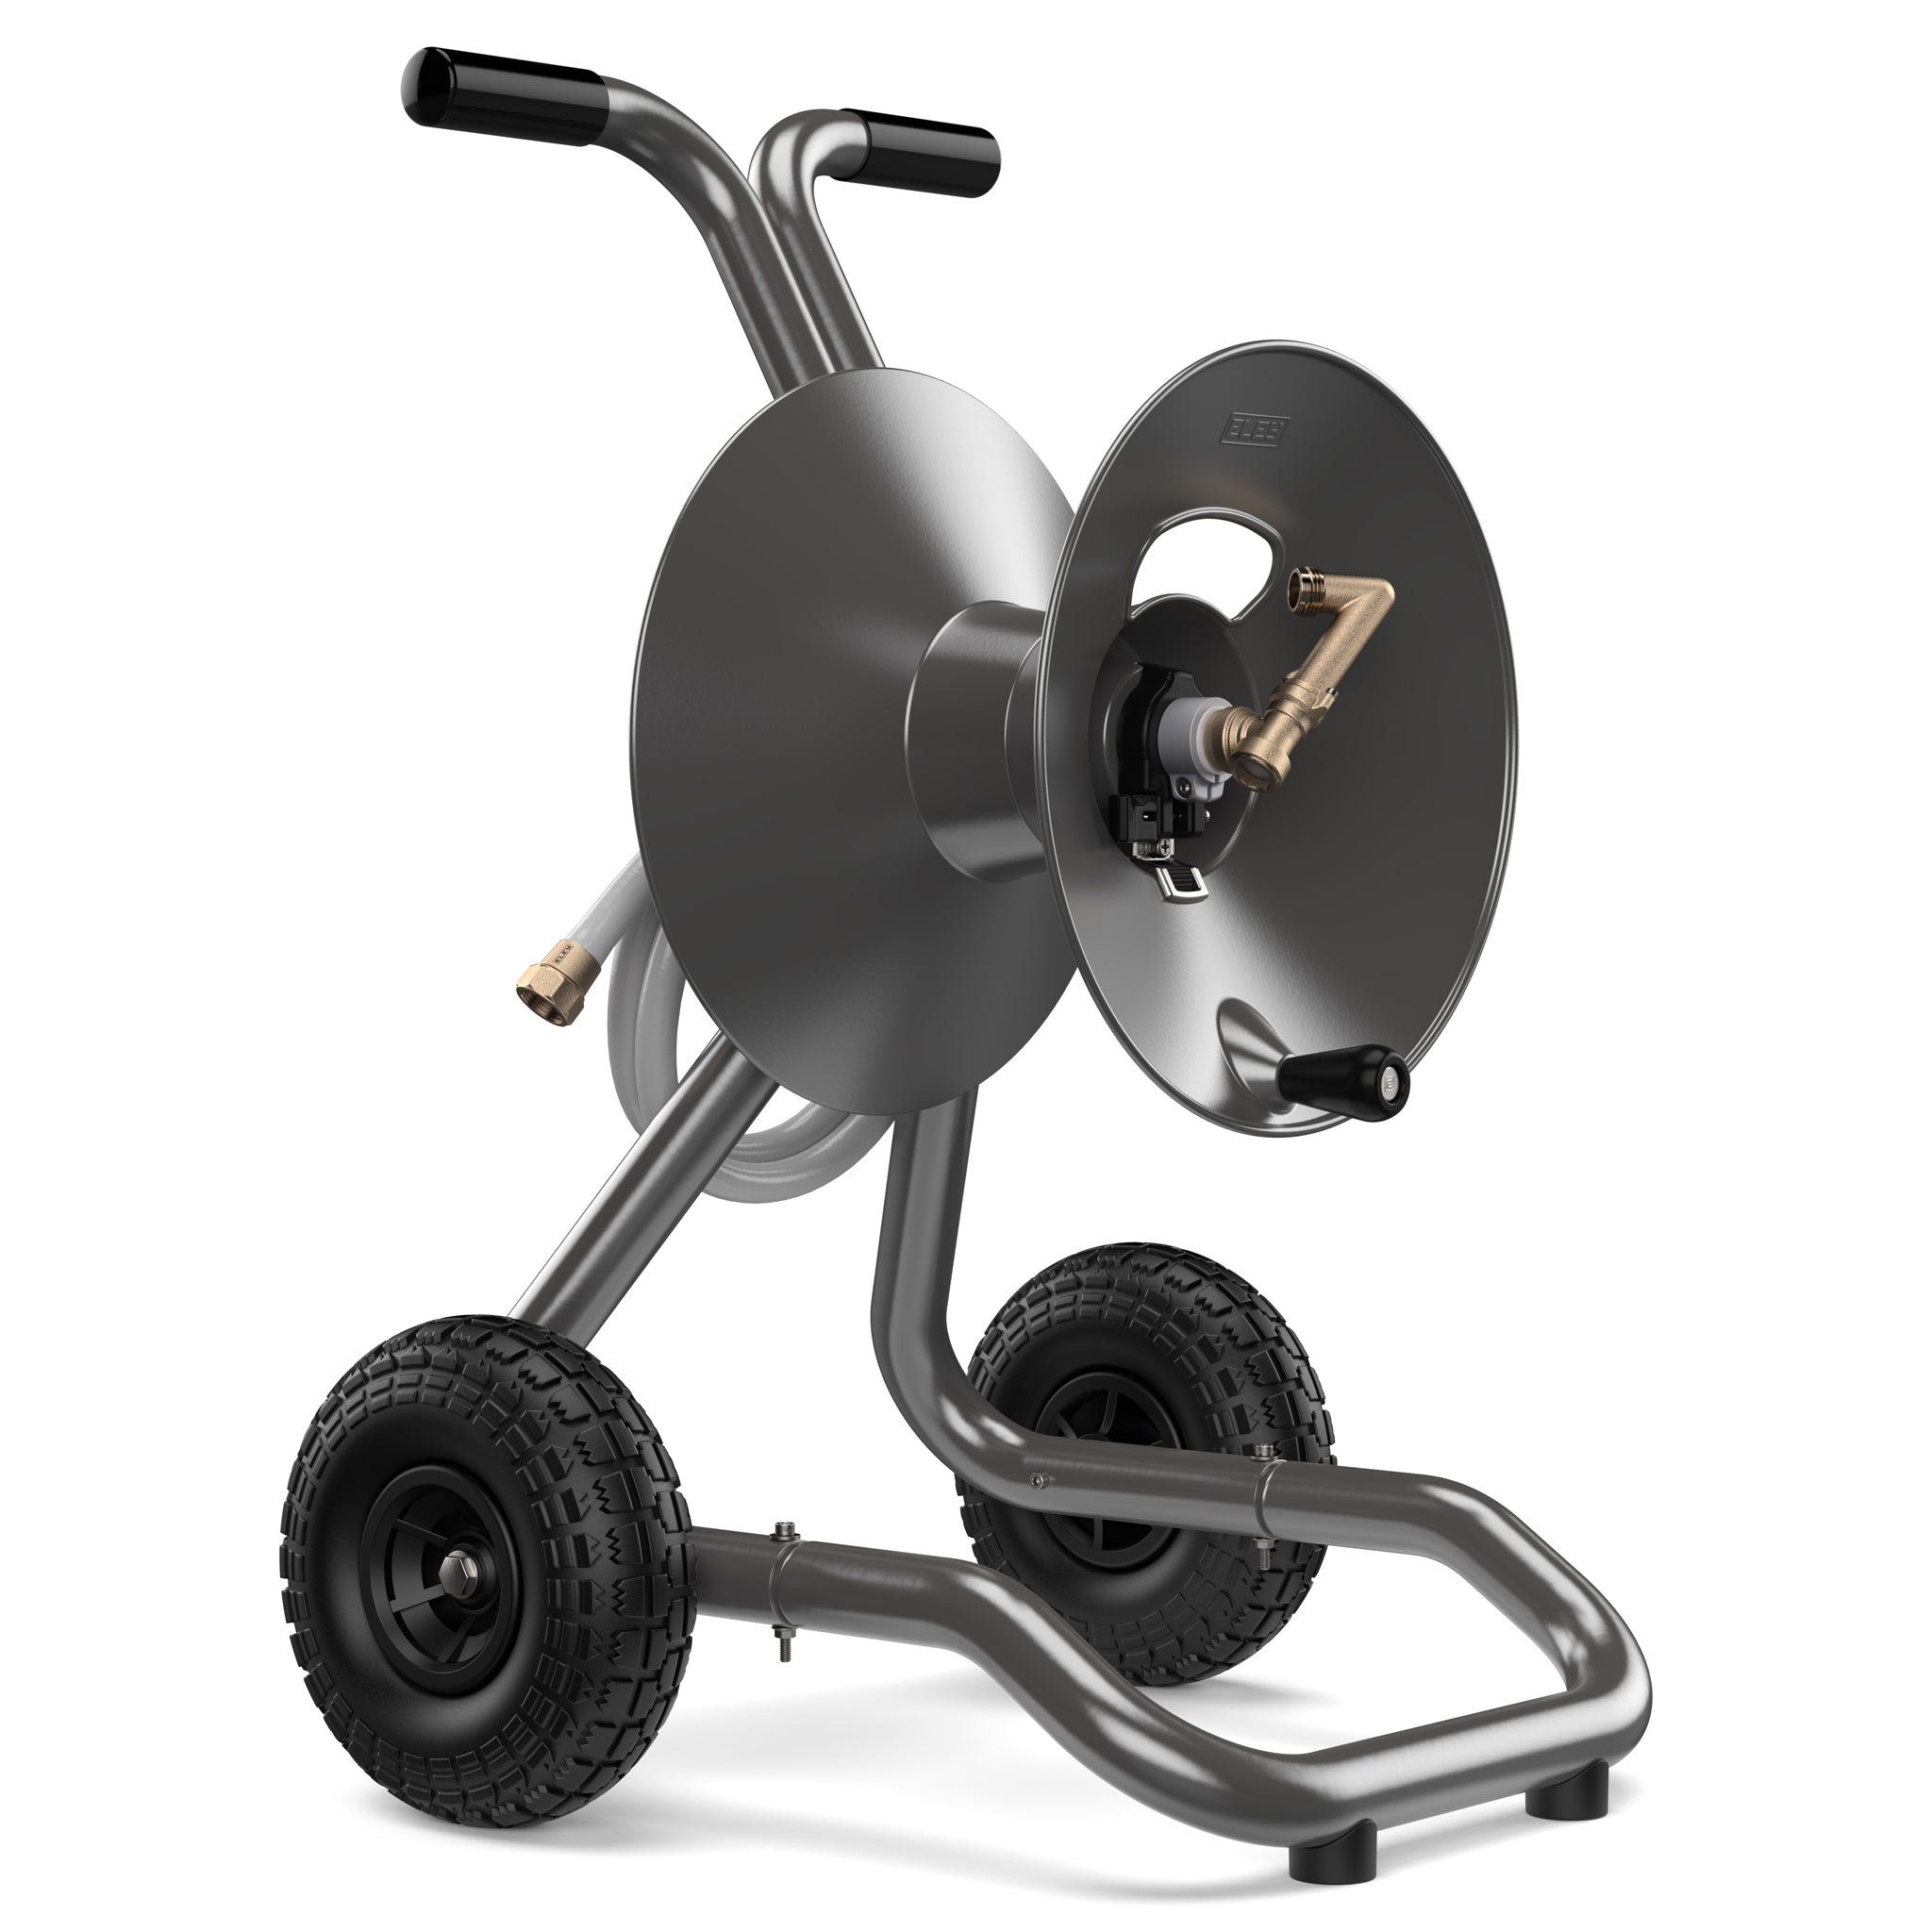 Did you know that the Hills Auto Retracting Hose Reel has a foldable handle  for easy transport around the garden? When connected to the w